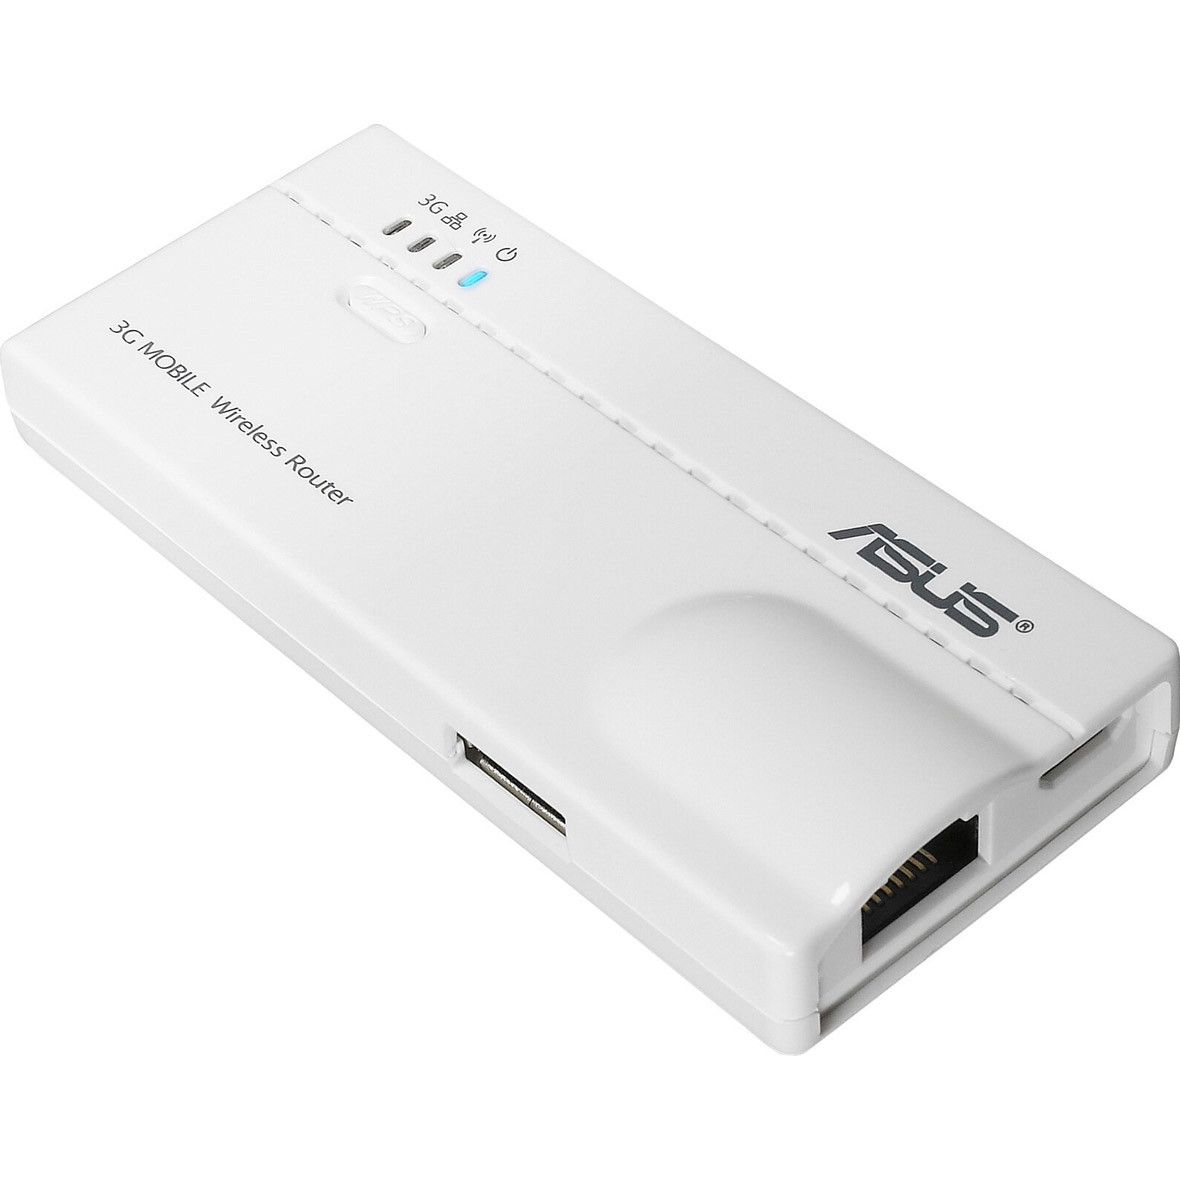 Маршрутизатор ASUS WL-330N3G USB (WiFi Router USB for 4G/3G modem)